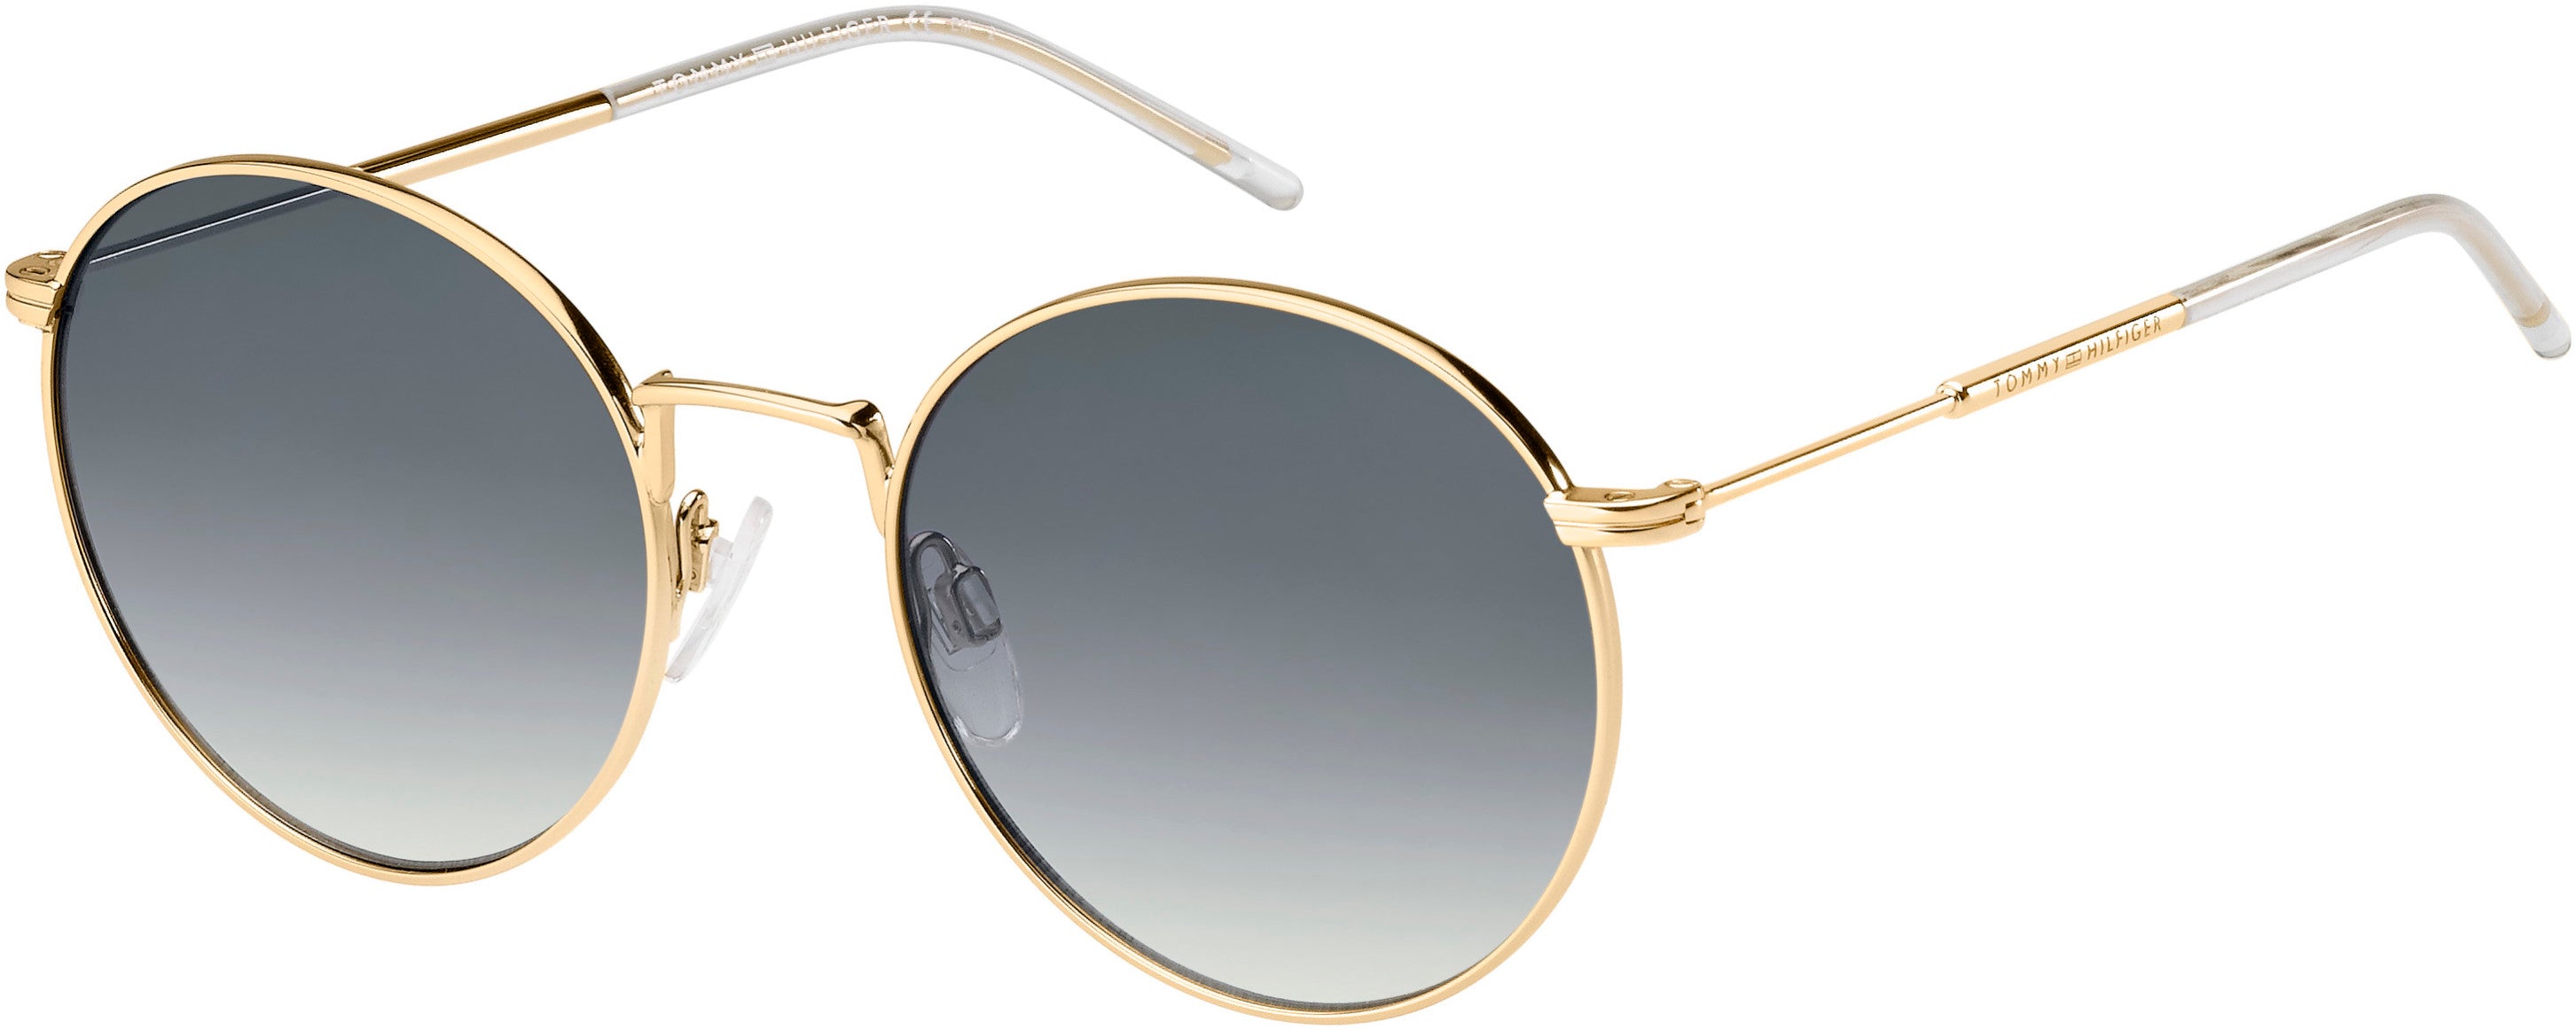 Tommy Hilfiger T. Hilfiger 1586/S Oval Modified Sunglasses 0000-0000  Rose Gold (9O Dark Gray Gradient)